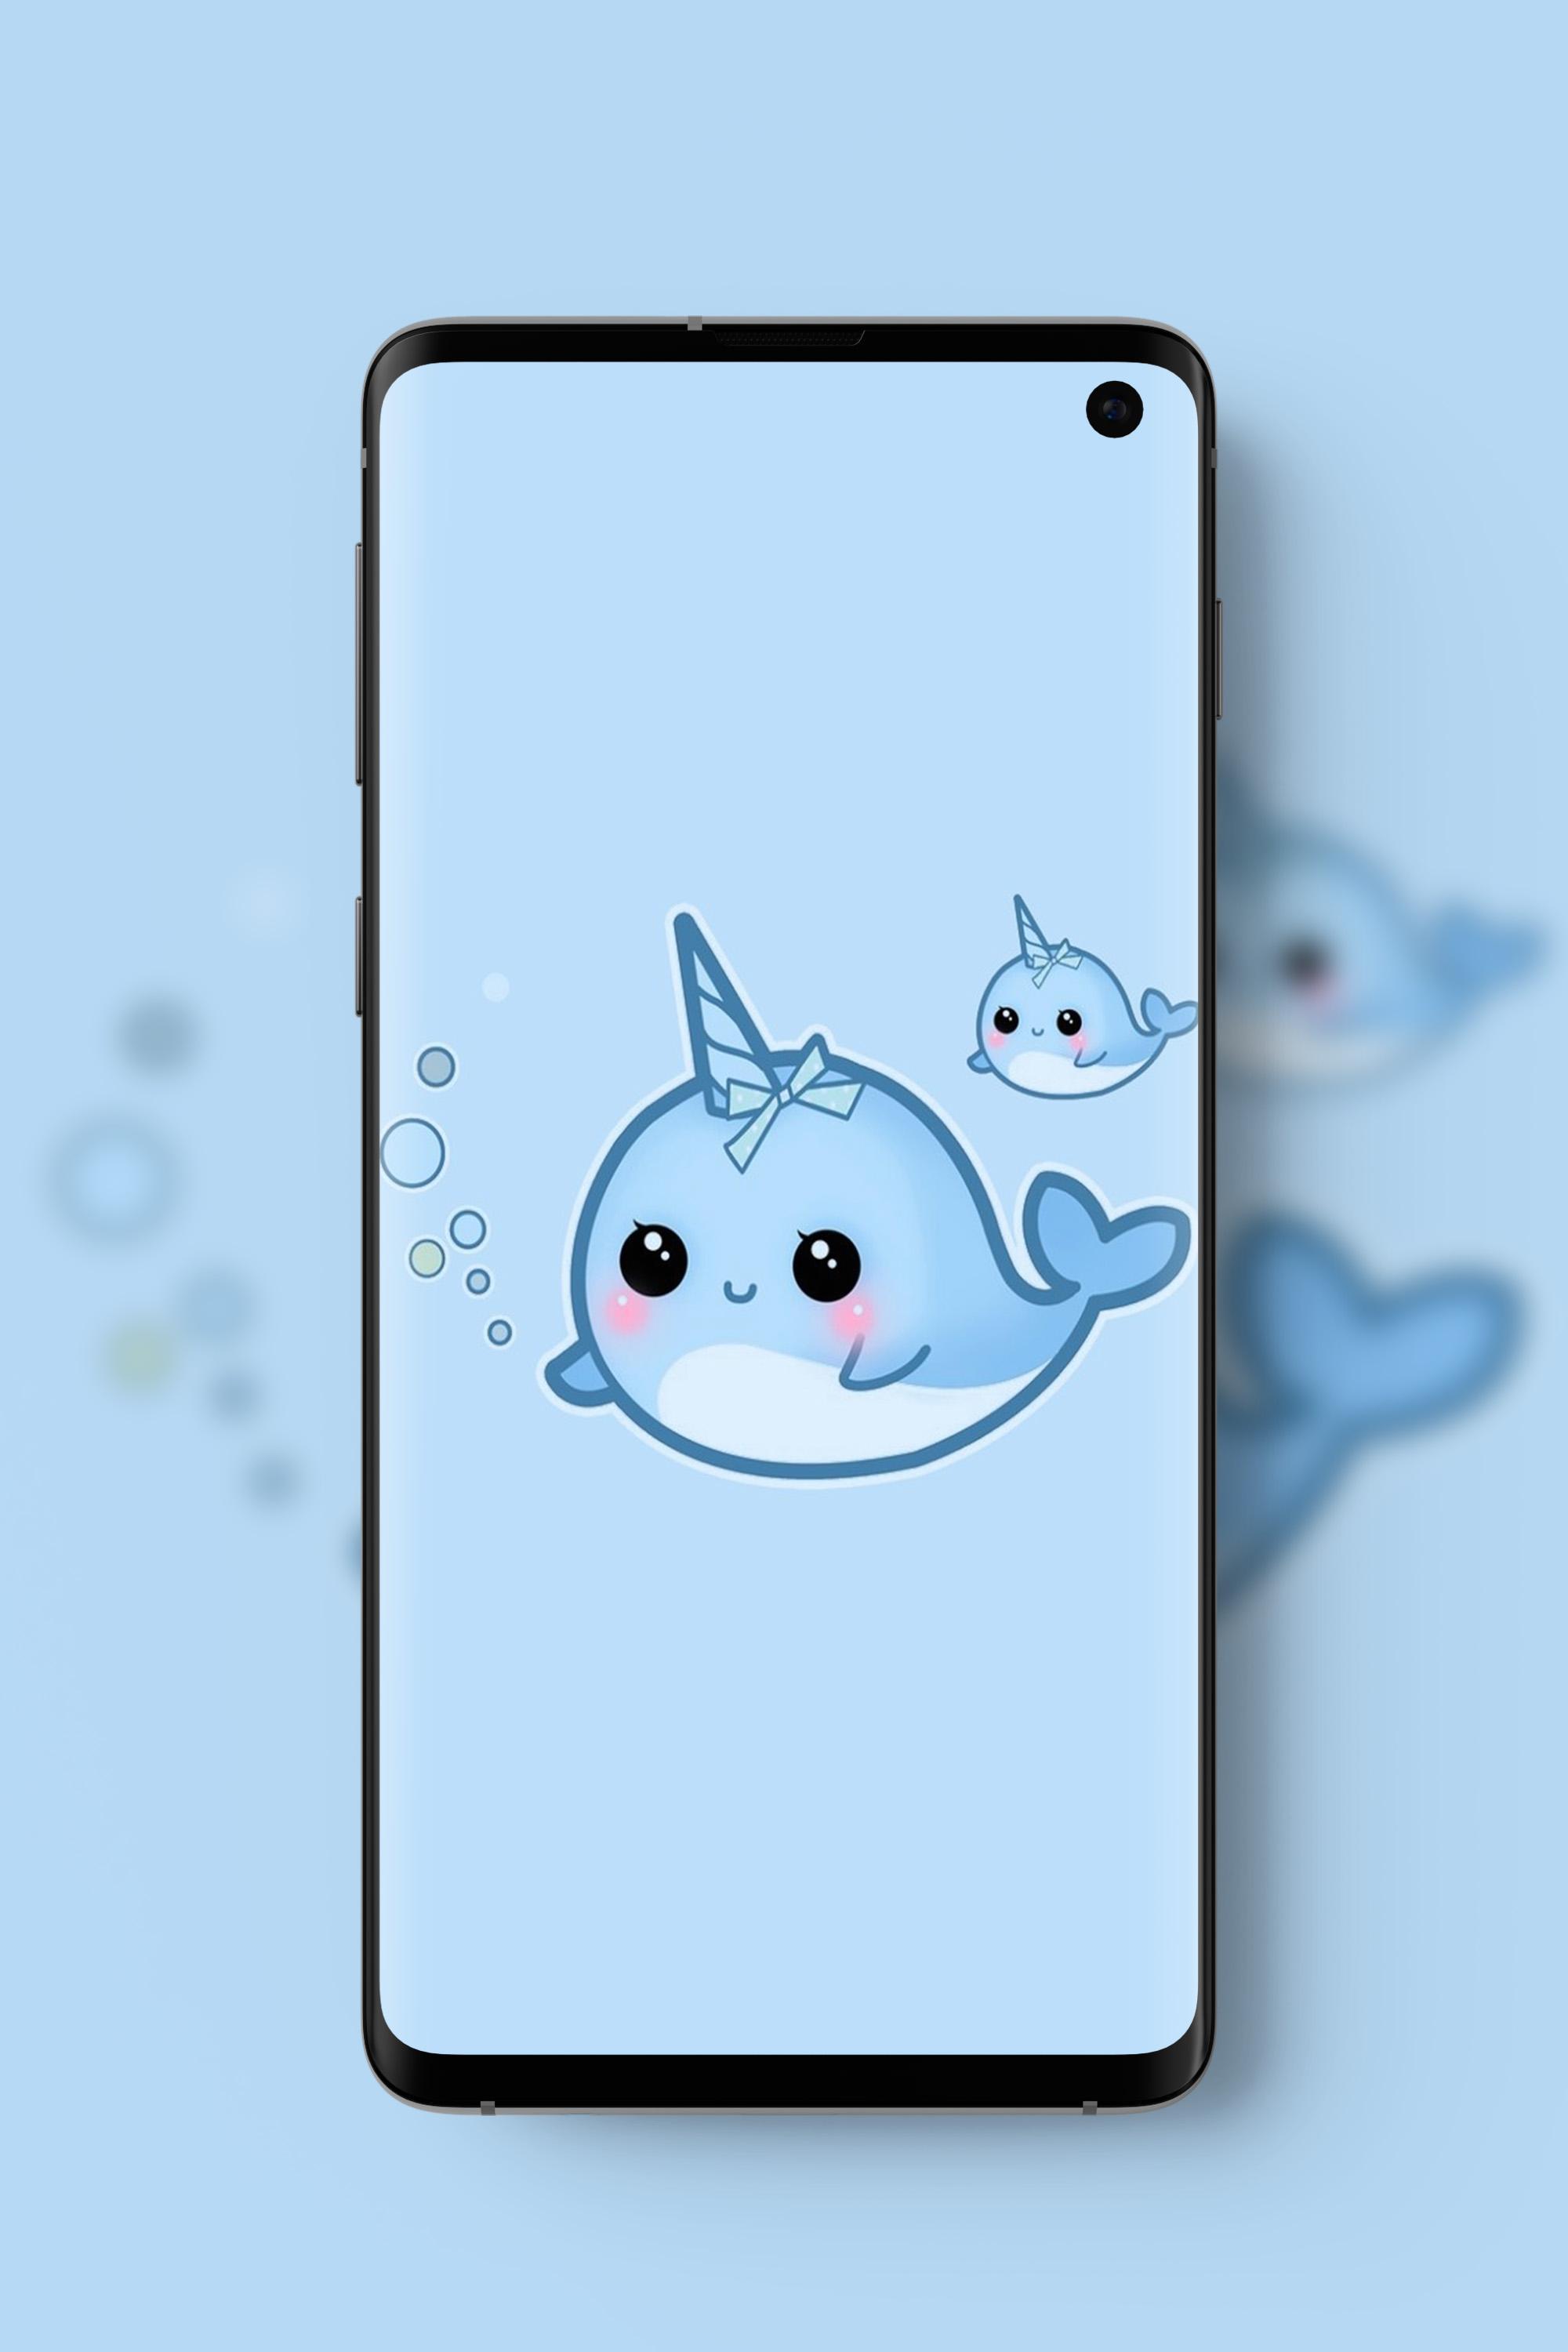 Cute Narwhal Wallpapers 2020 APK للاندرويد تنزيل